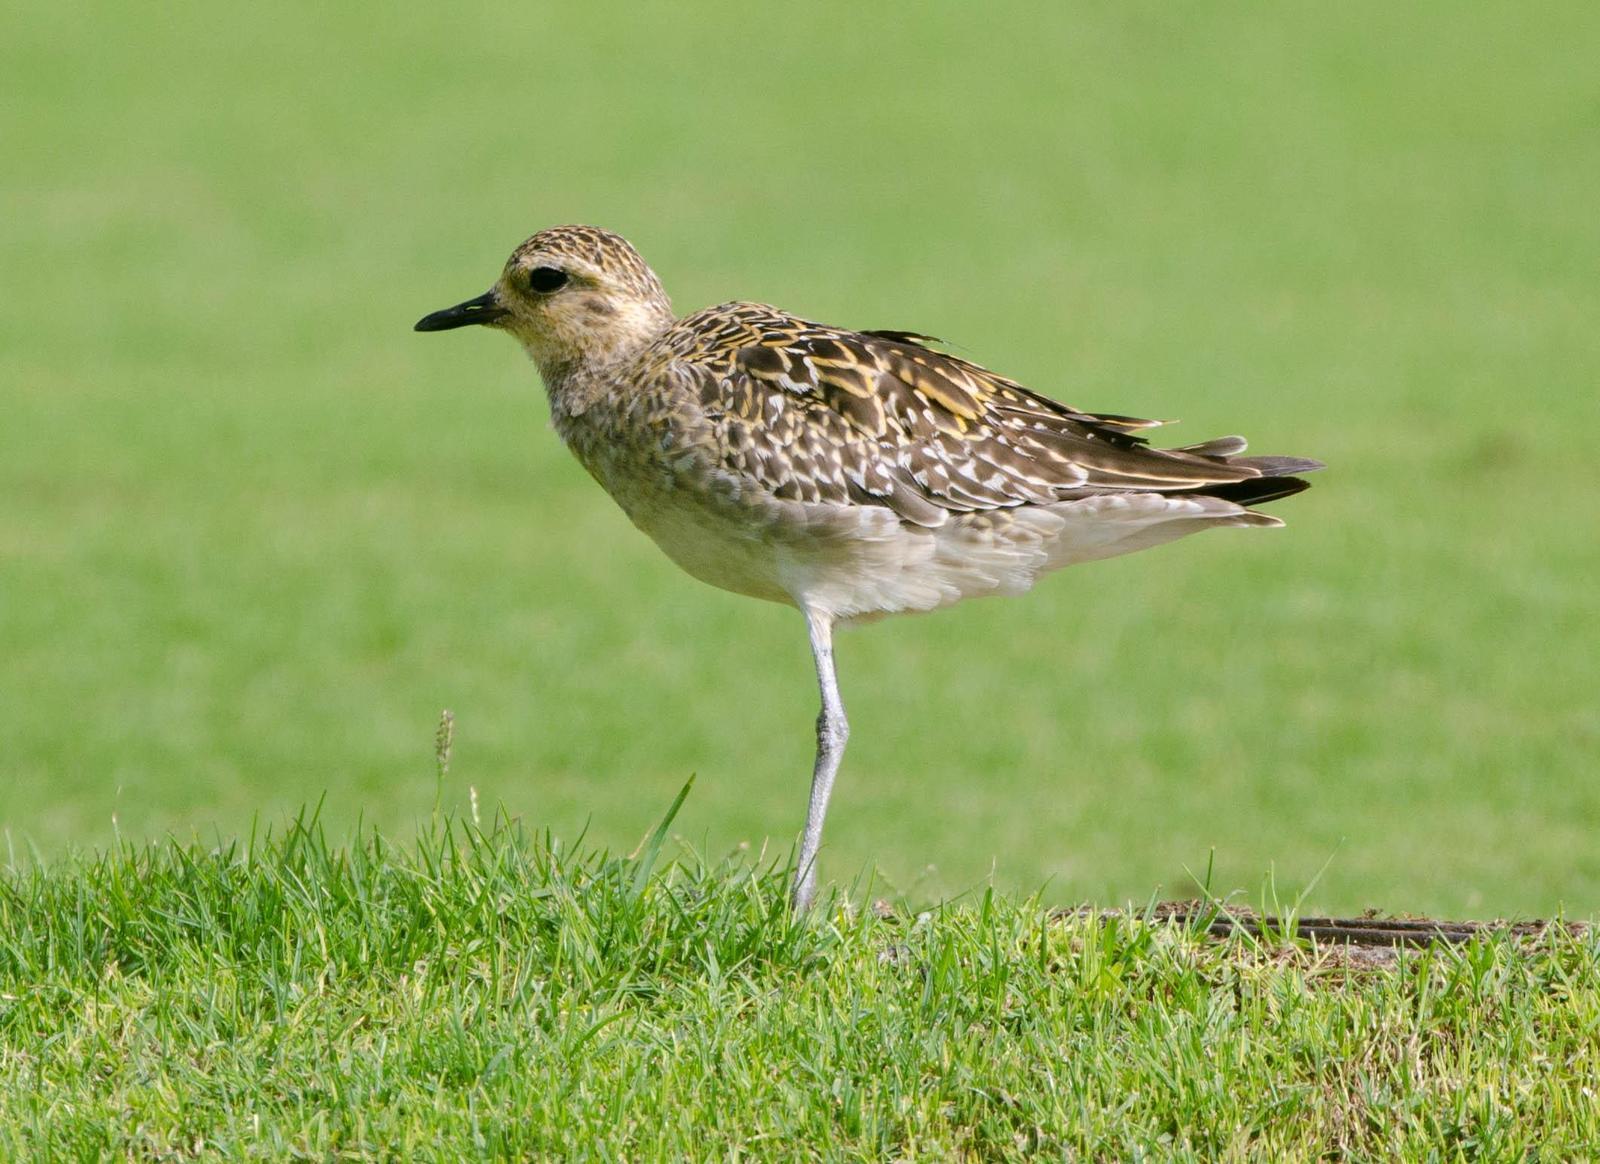 Pacific Golden-Plover Photo by Scott Yerges